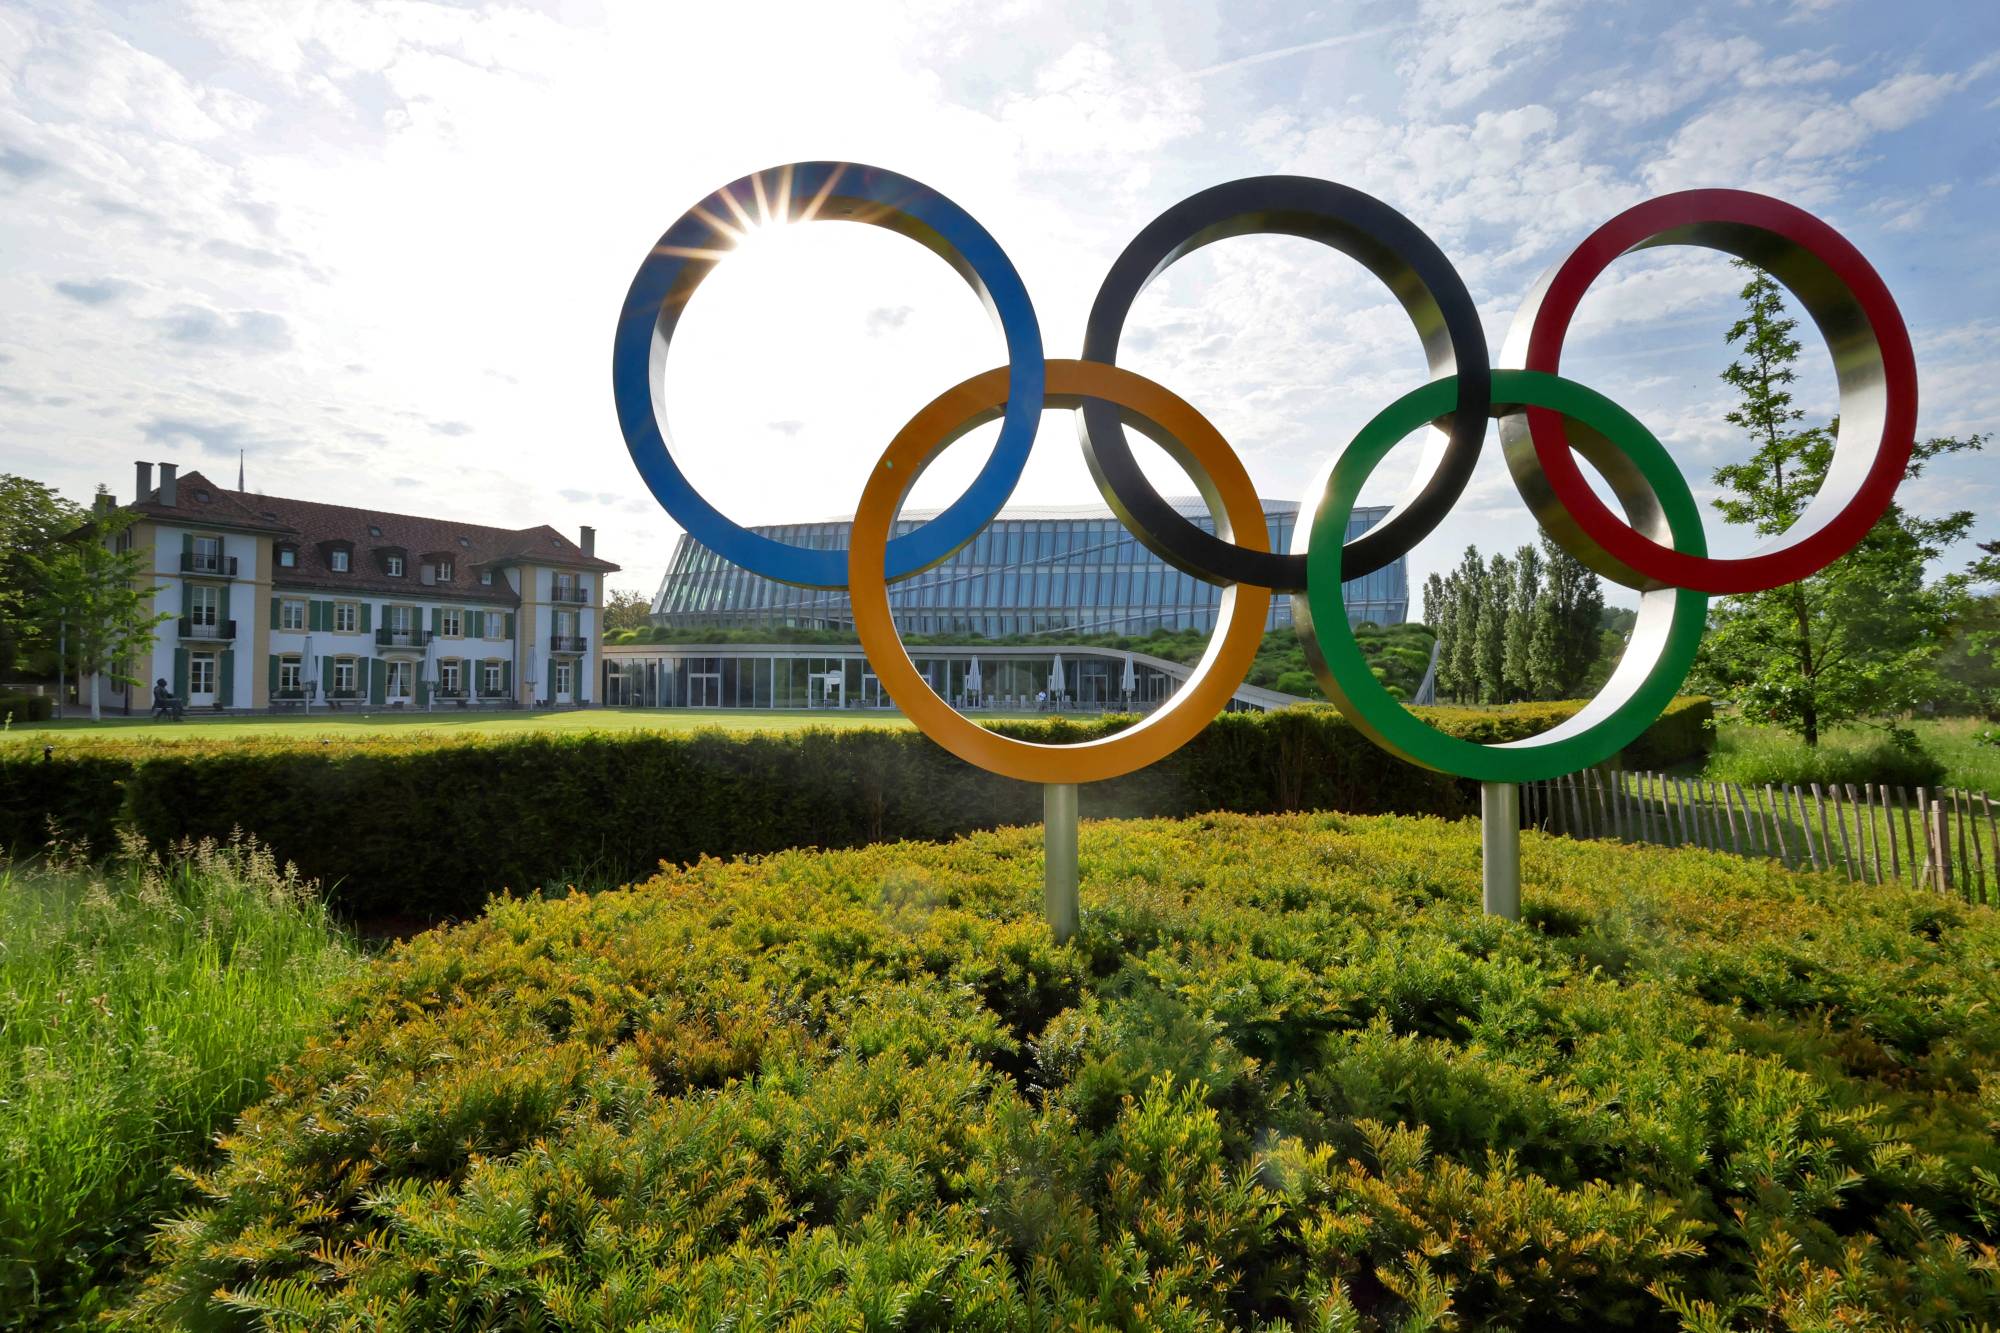  The Olympic rings are seen in front of the International Olympic Committee () headquarters in Lausanne, Switzerland. | REUTERS